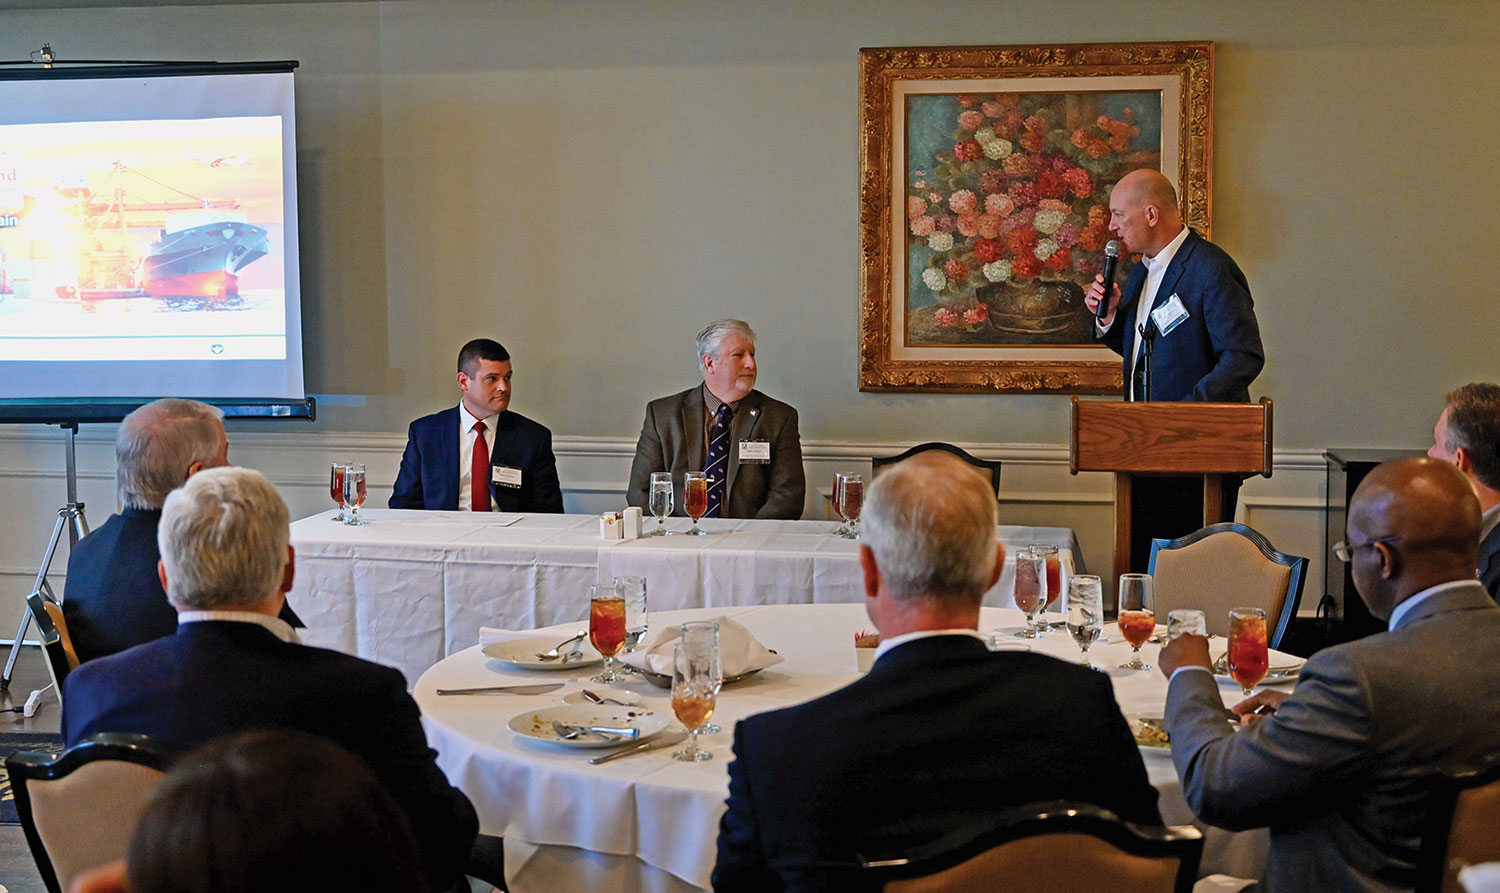 Simons Center Deputy Director John Nelson, right, introduces the panel members for the Arter-Rowland National Security Forum luncheon event on Jan. 27, 2022, at the Carriage Club in downtown Kansas City. From left, retired U.S. Army Col. Matthew Dimmick, former White House advisor and national security professional, and Keith Prather, one of the founders and managing directors of Armada Corporate Intelligence, served as panelists in the forum to discuss the impact supply chain vulnerabilities have on the Kansas City metropolitan area.